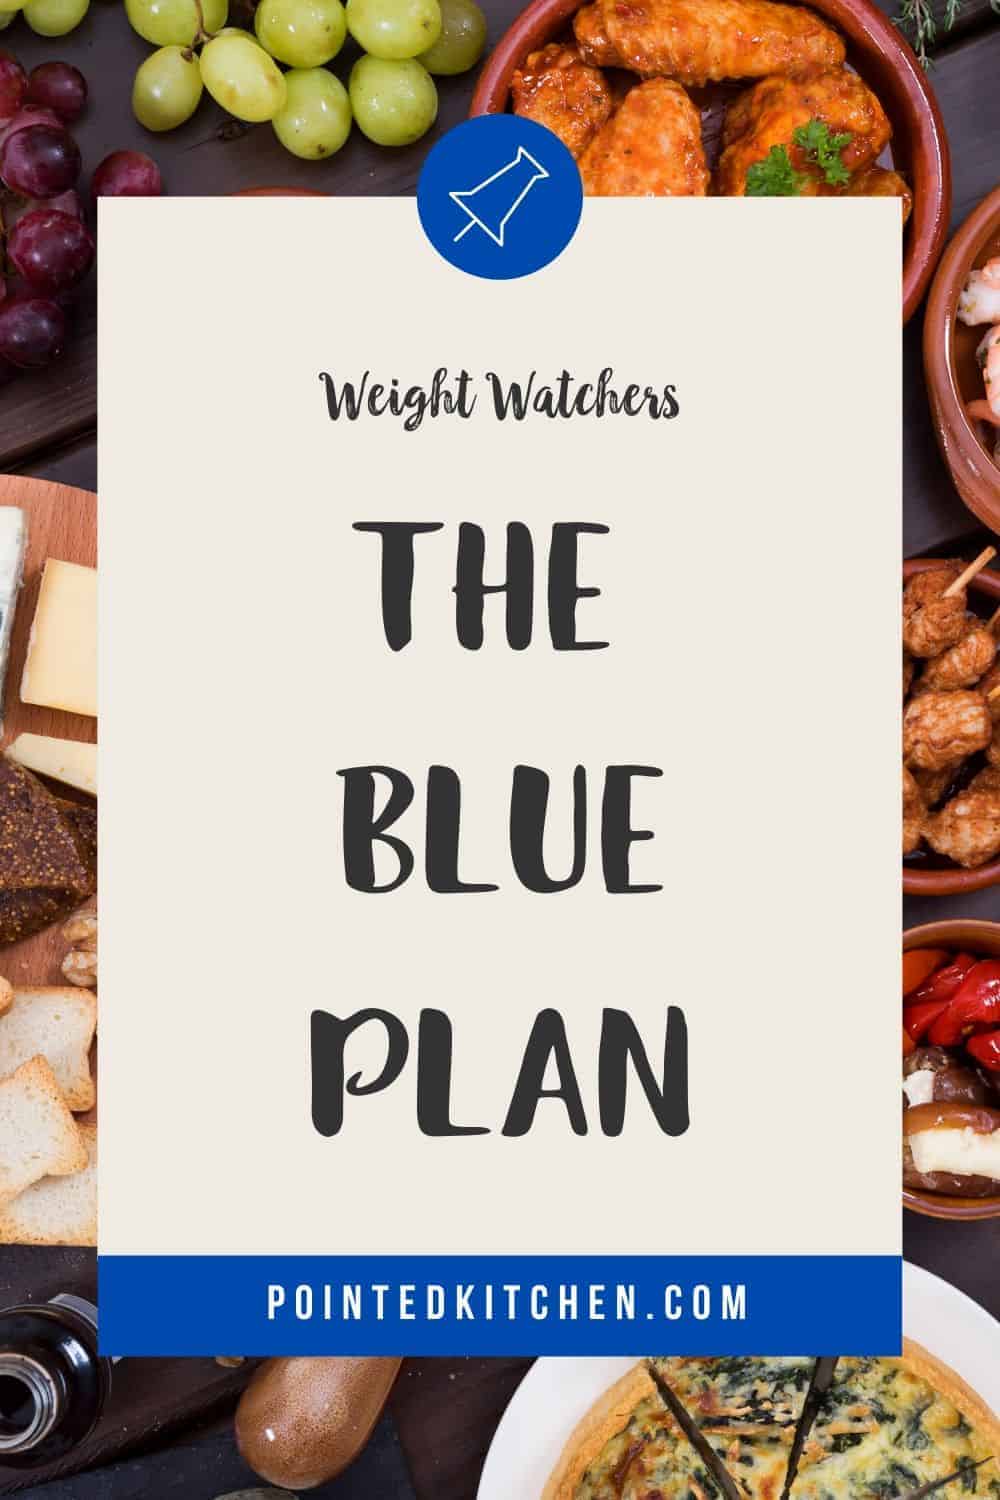 Dishes of different foods on a dark background with a text overlay - the blue plan